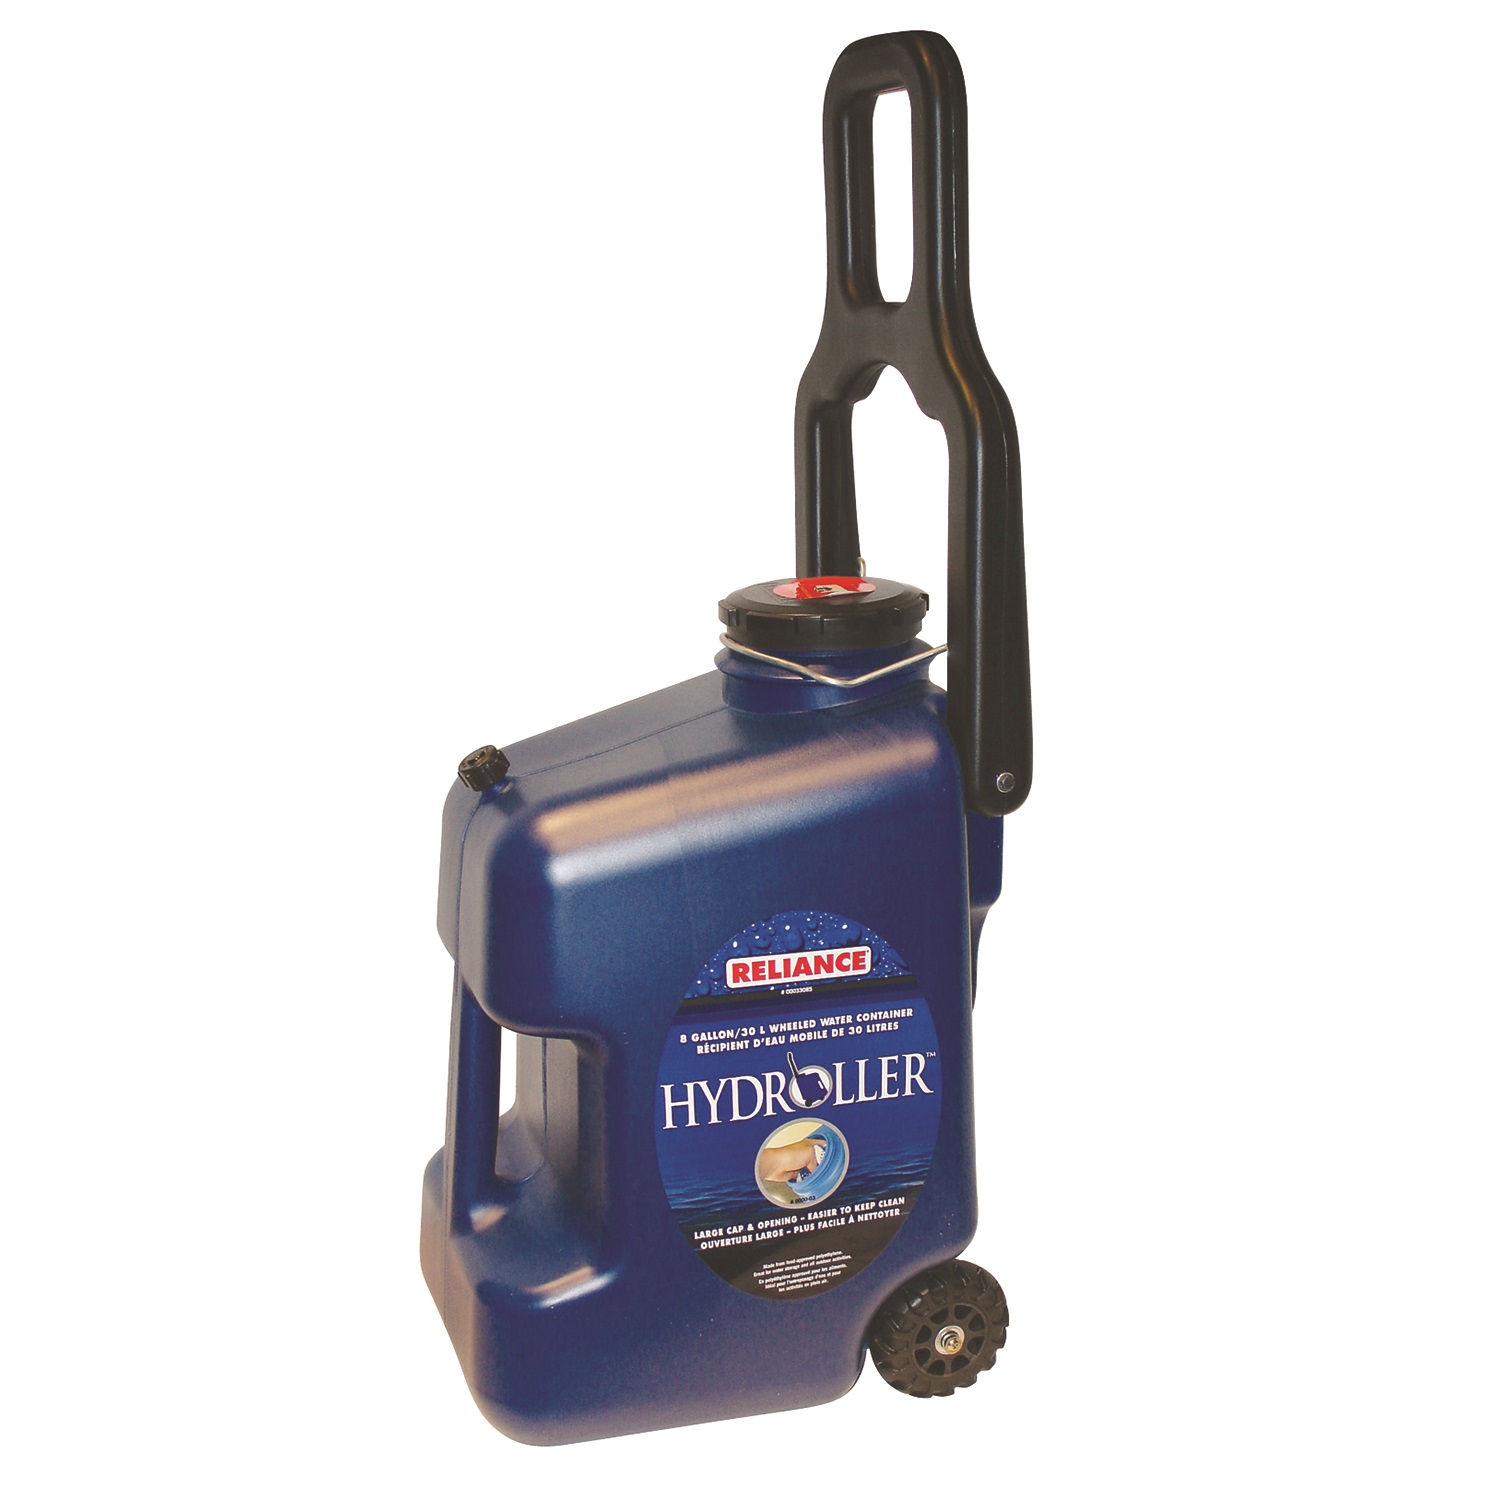 Reliance Hydroller Wheeled Water Container 8 Gallon - image 1 of 2